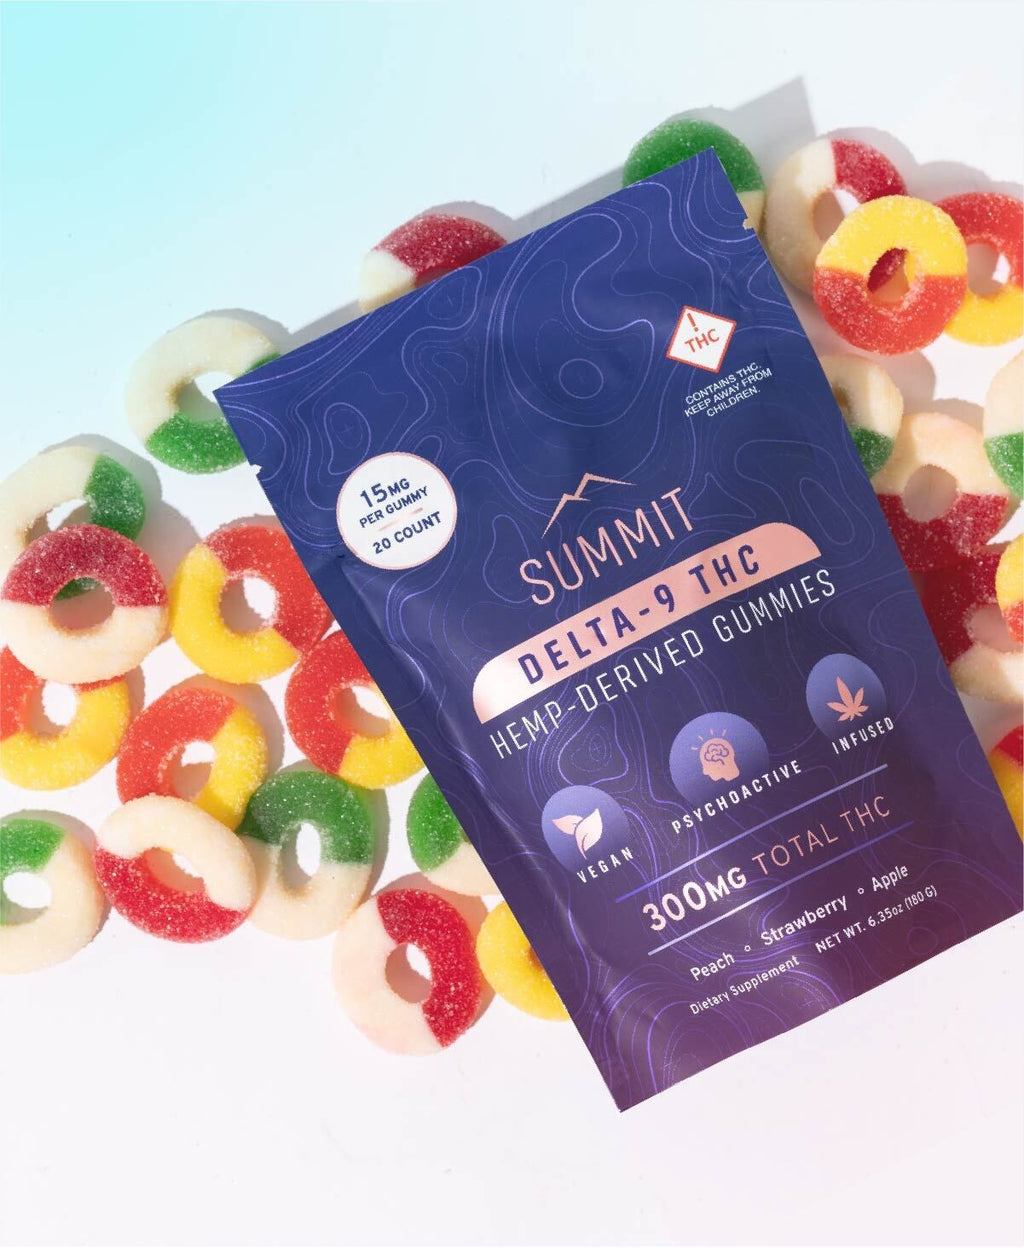 *Back in Stock! Summit - 15mg Hemp Derived THC Gummies - 20 count - Get 12% Discount w/Subscription!